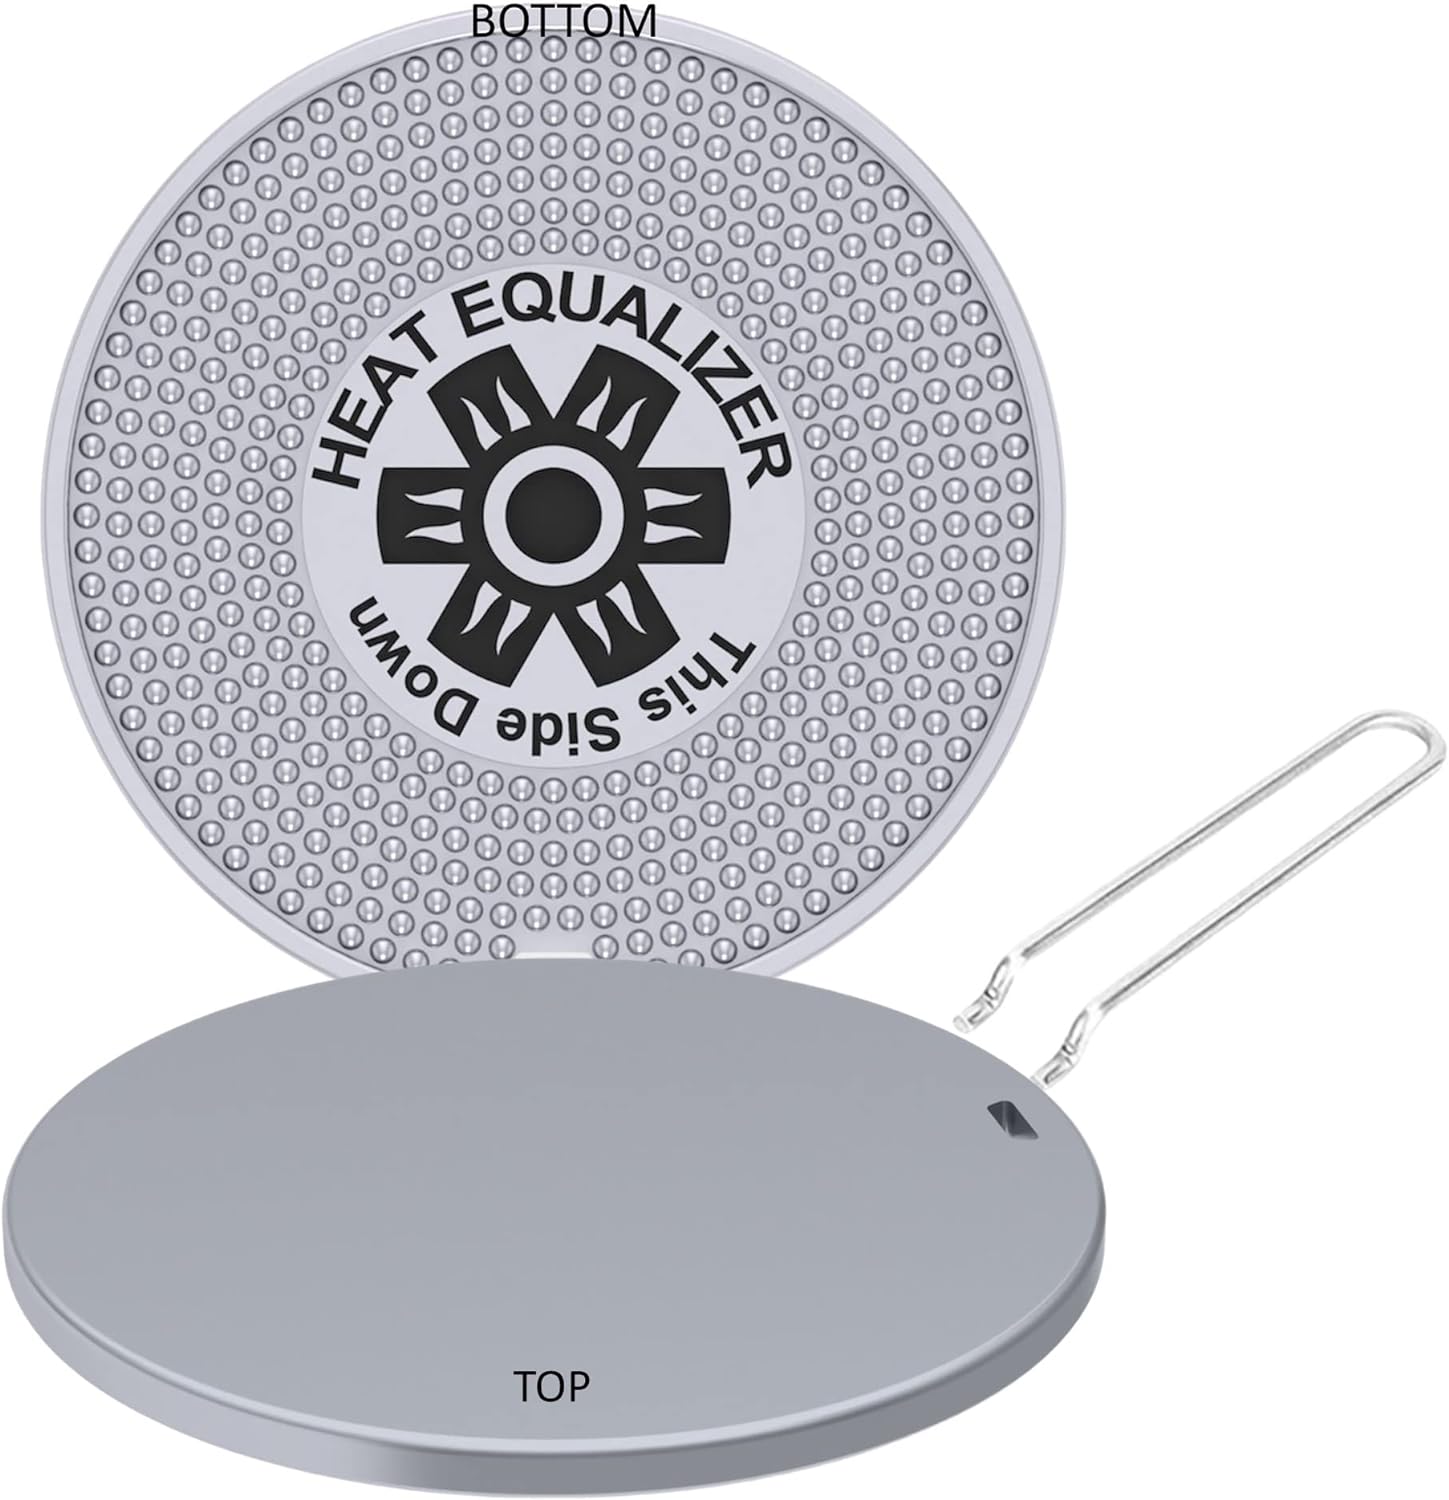  Cook Like a Pro with The Heat Equalizer Heat Diffuser - Gas Stove Burner Cover